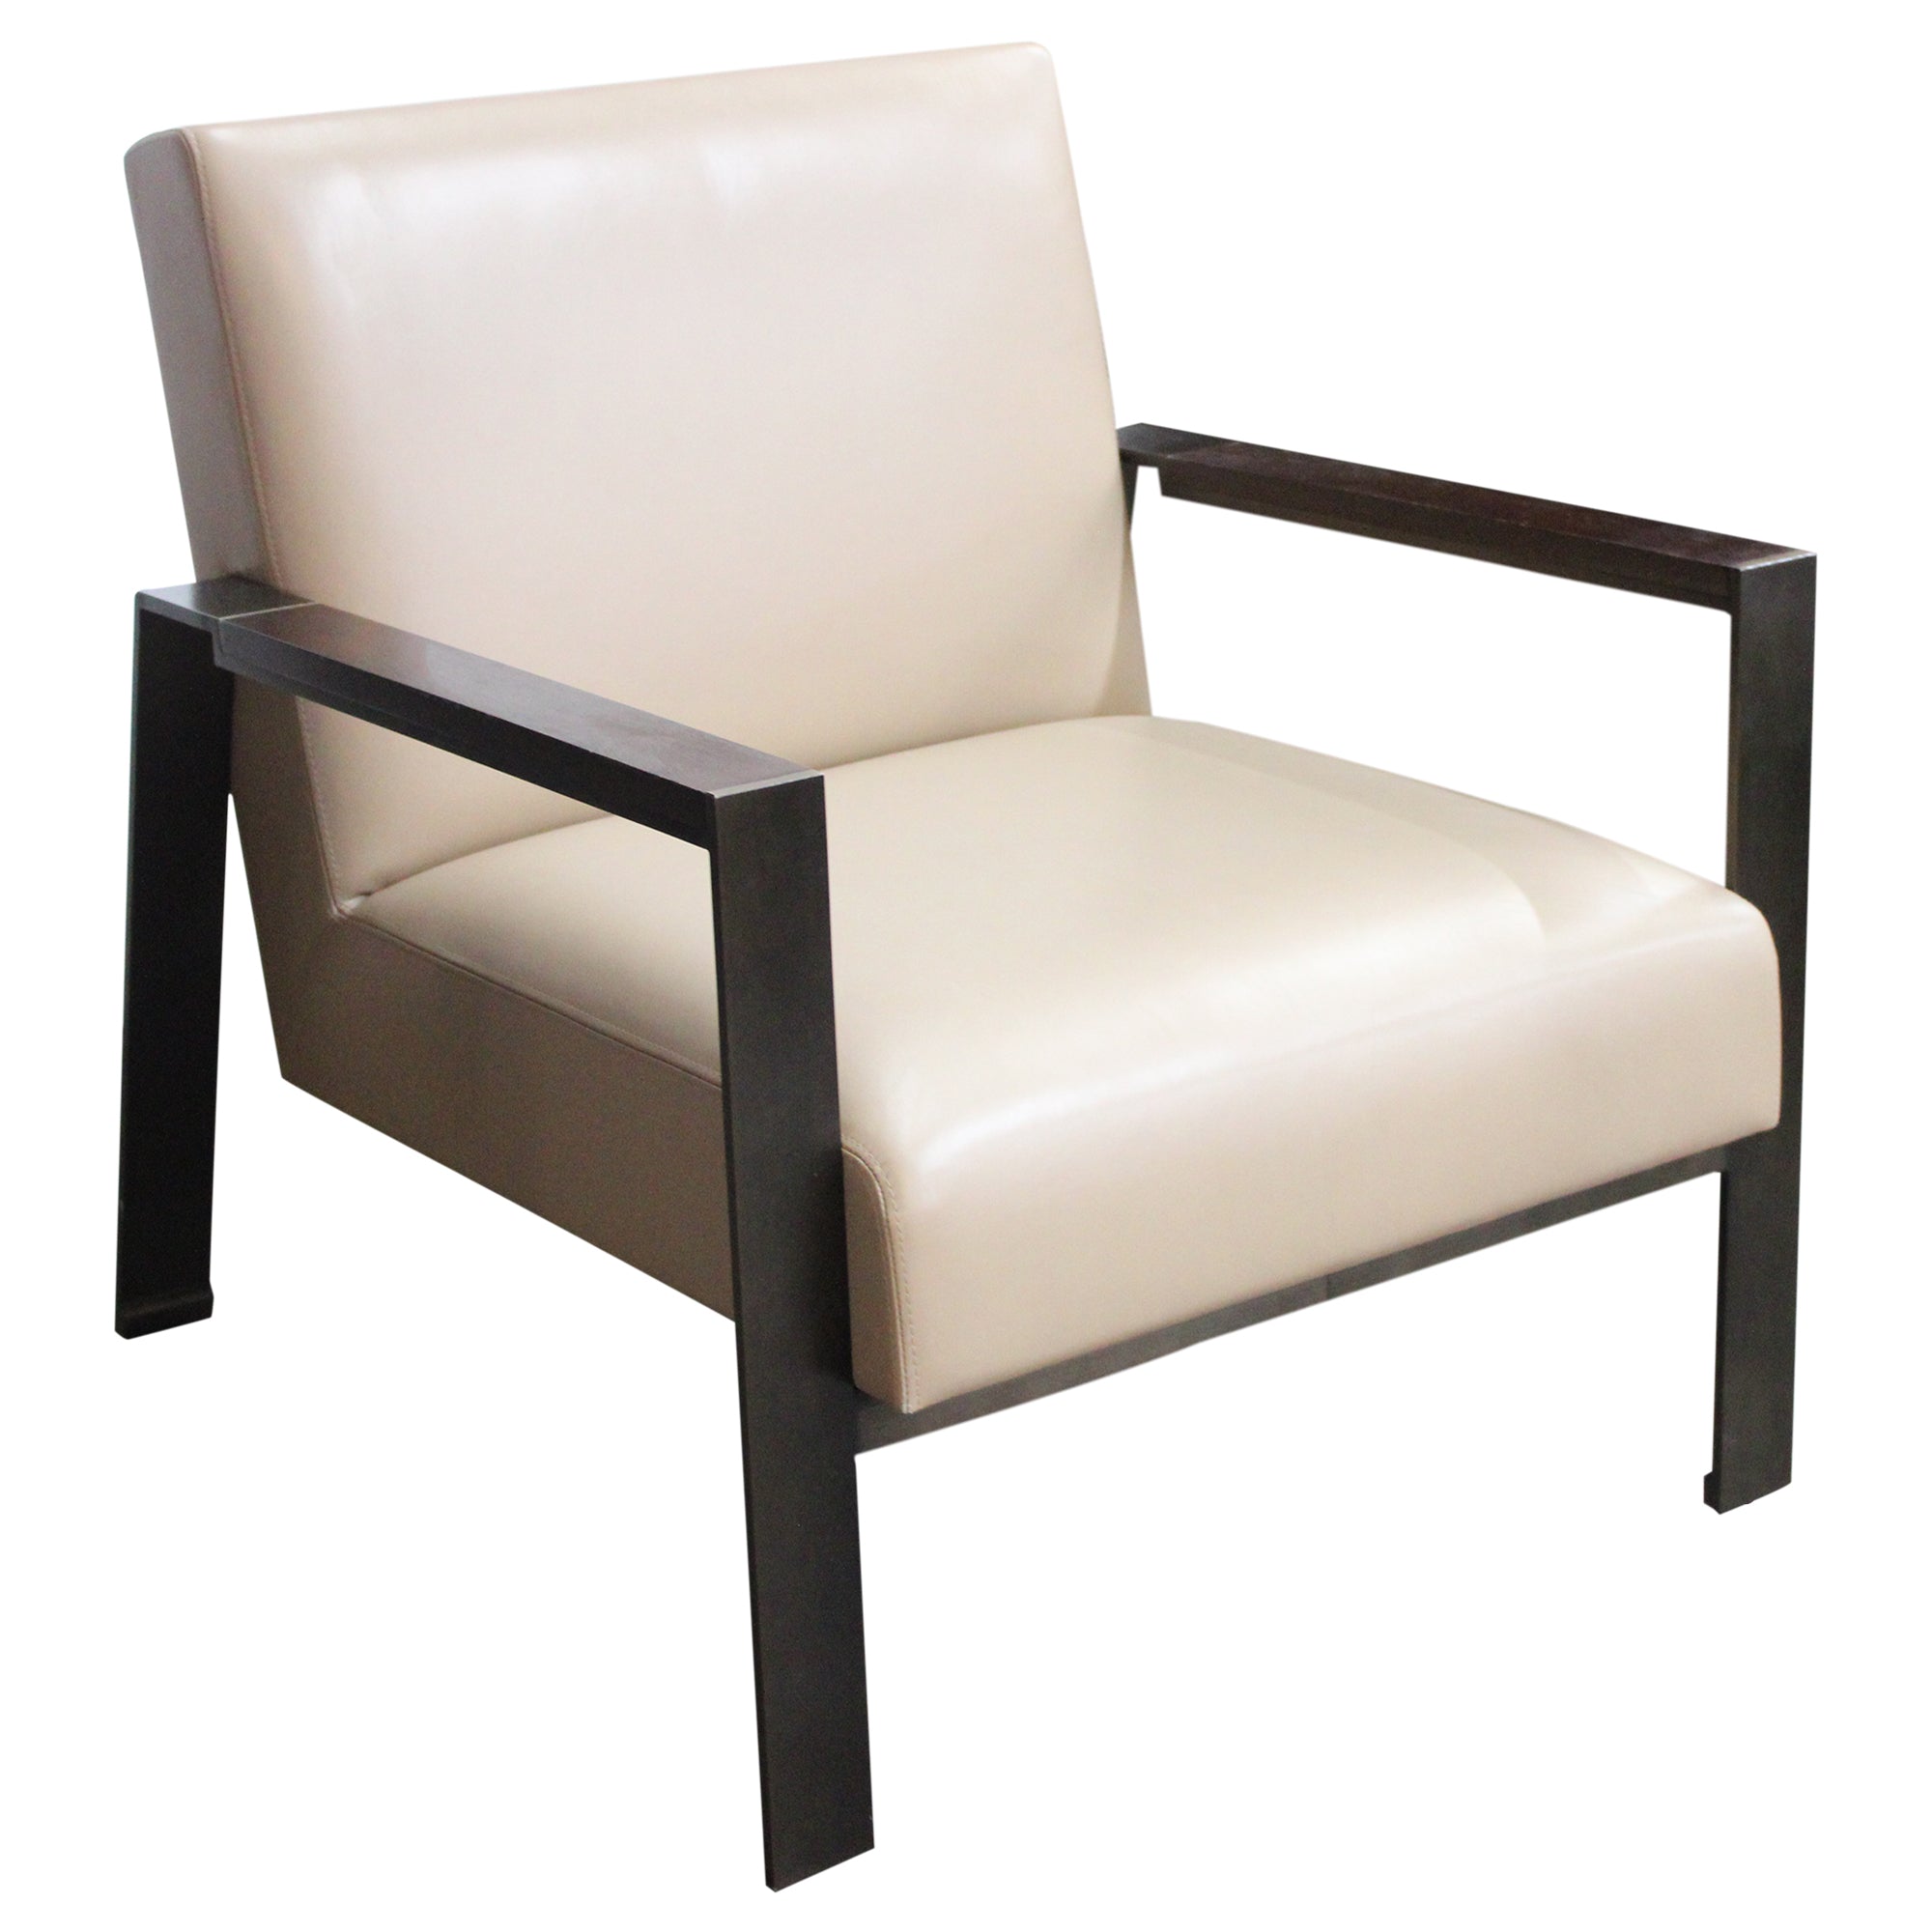 Holly Hunt New Linden Lounge Chair, Tan - Preowned CLOSEOUT